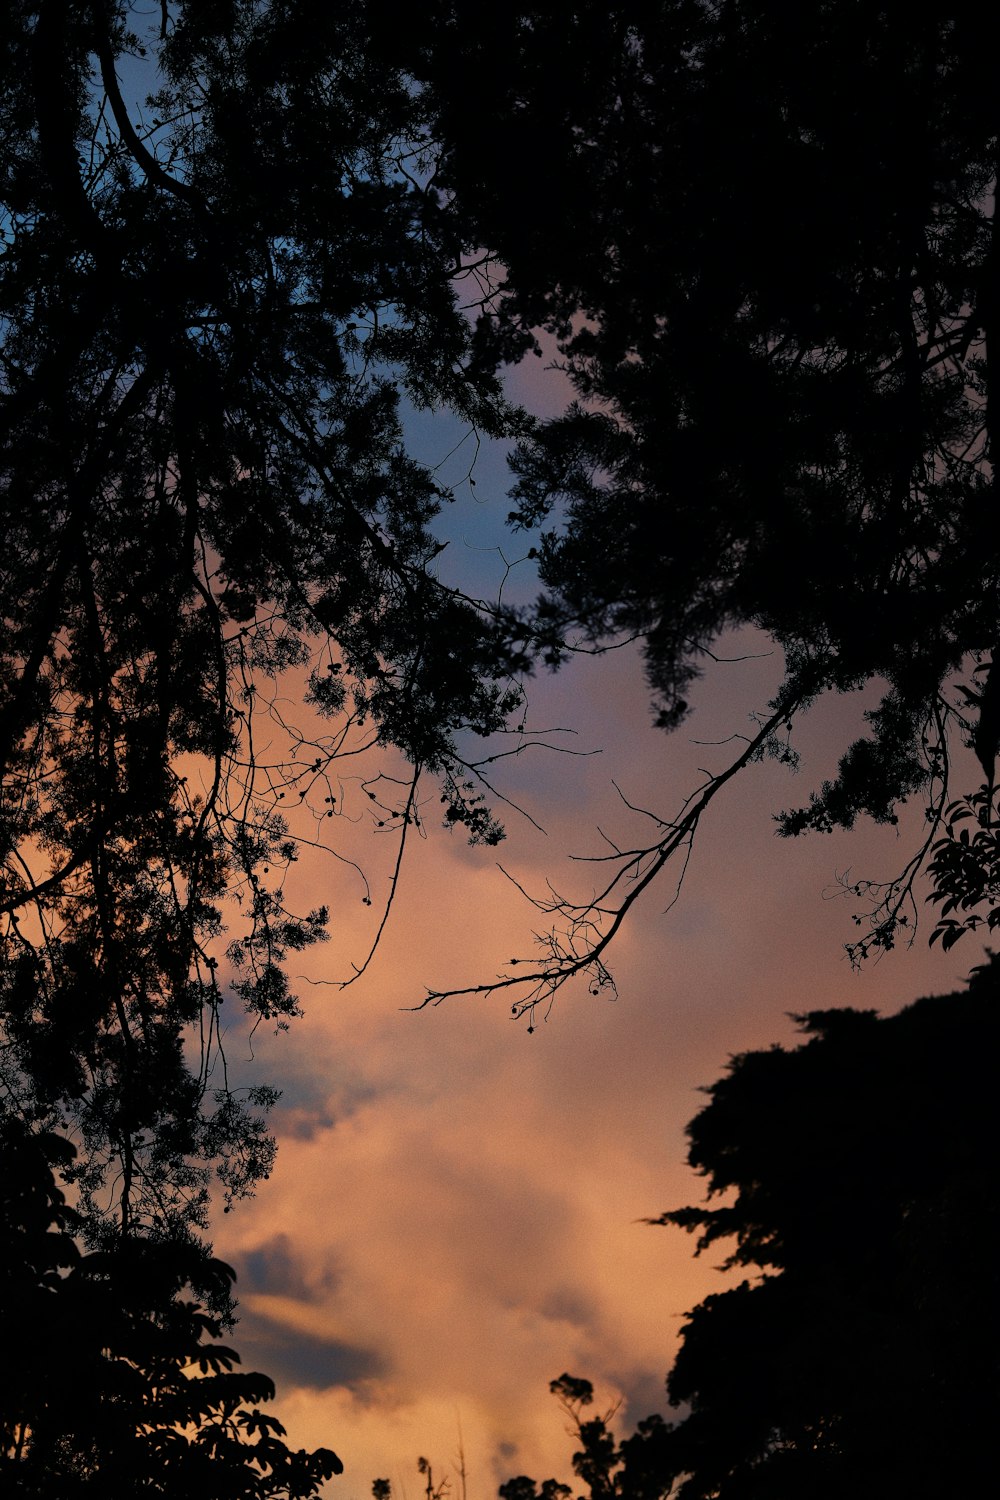 a view of a sunset through some trees